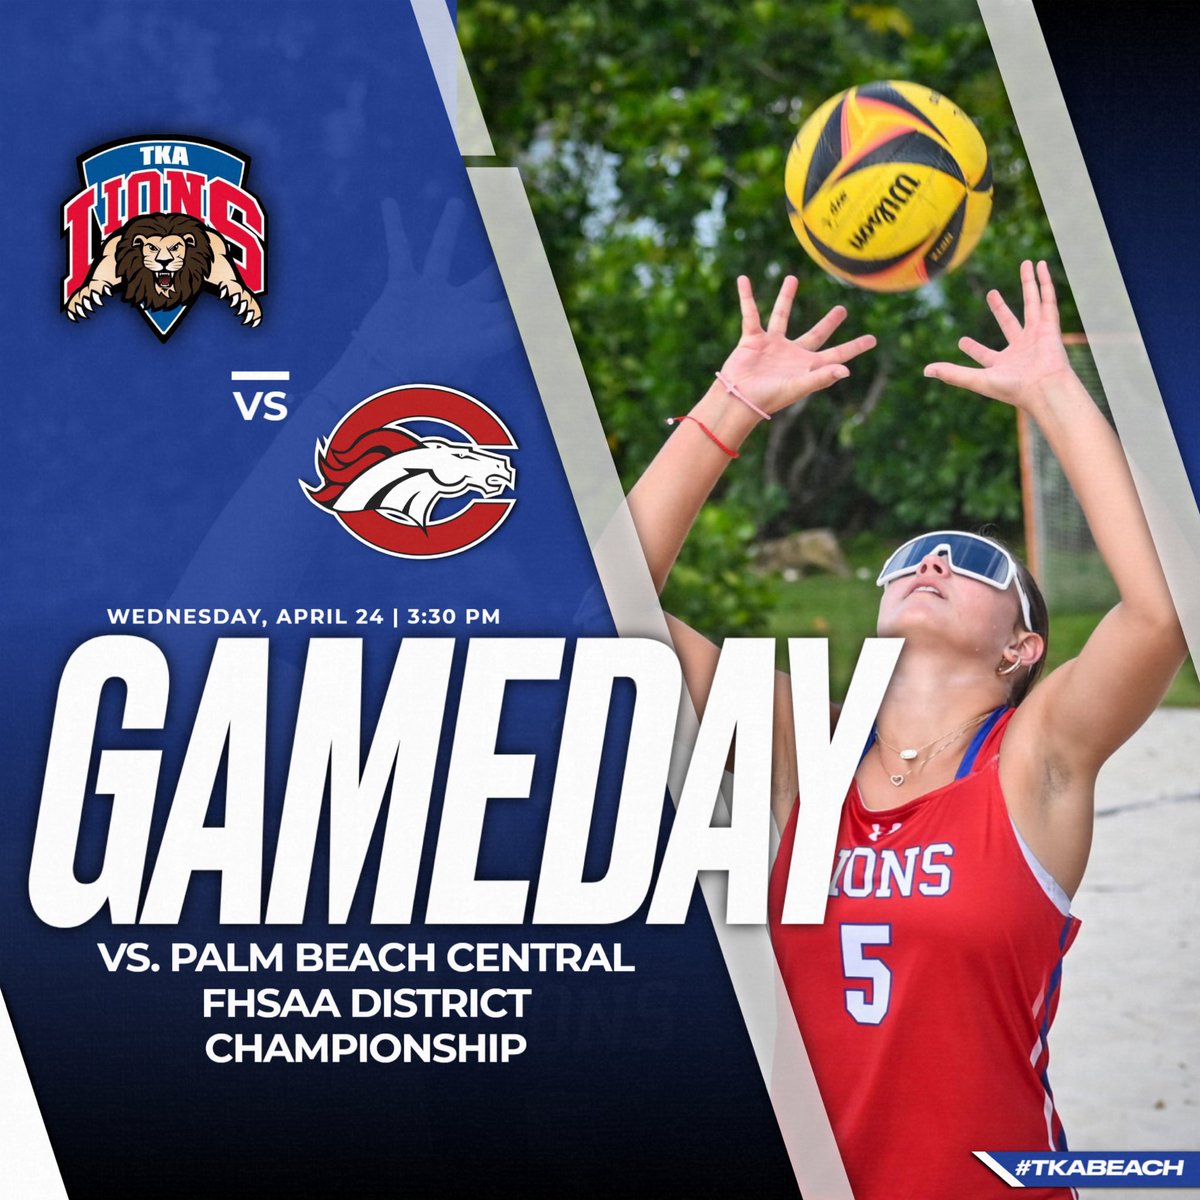 The Lions will compete for the district title today at 3:30 pm against Palm Beach Central. Let’s go Lions! #tkabeach 🏐 @TKAWPB @pbphighschools @ESPNWestPalm